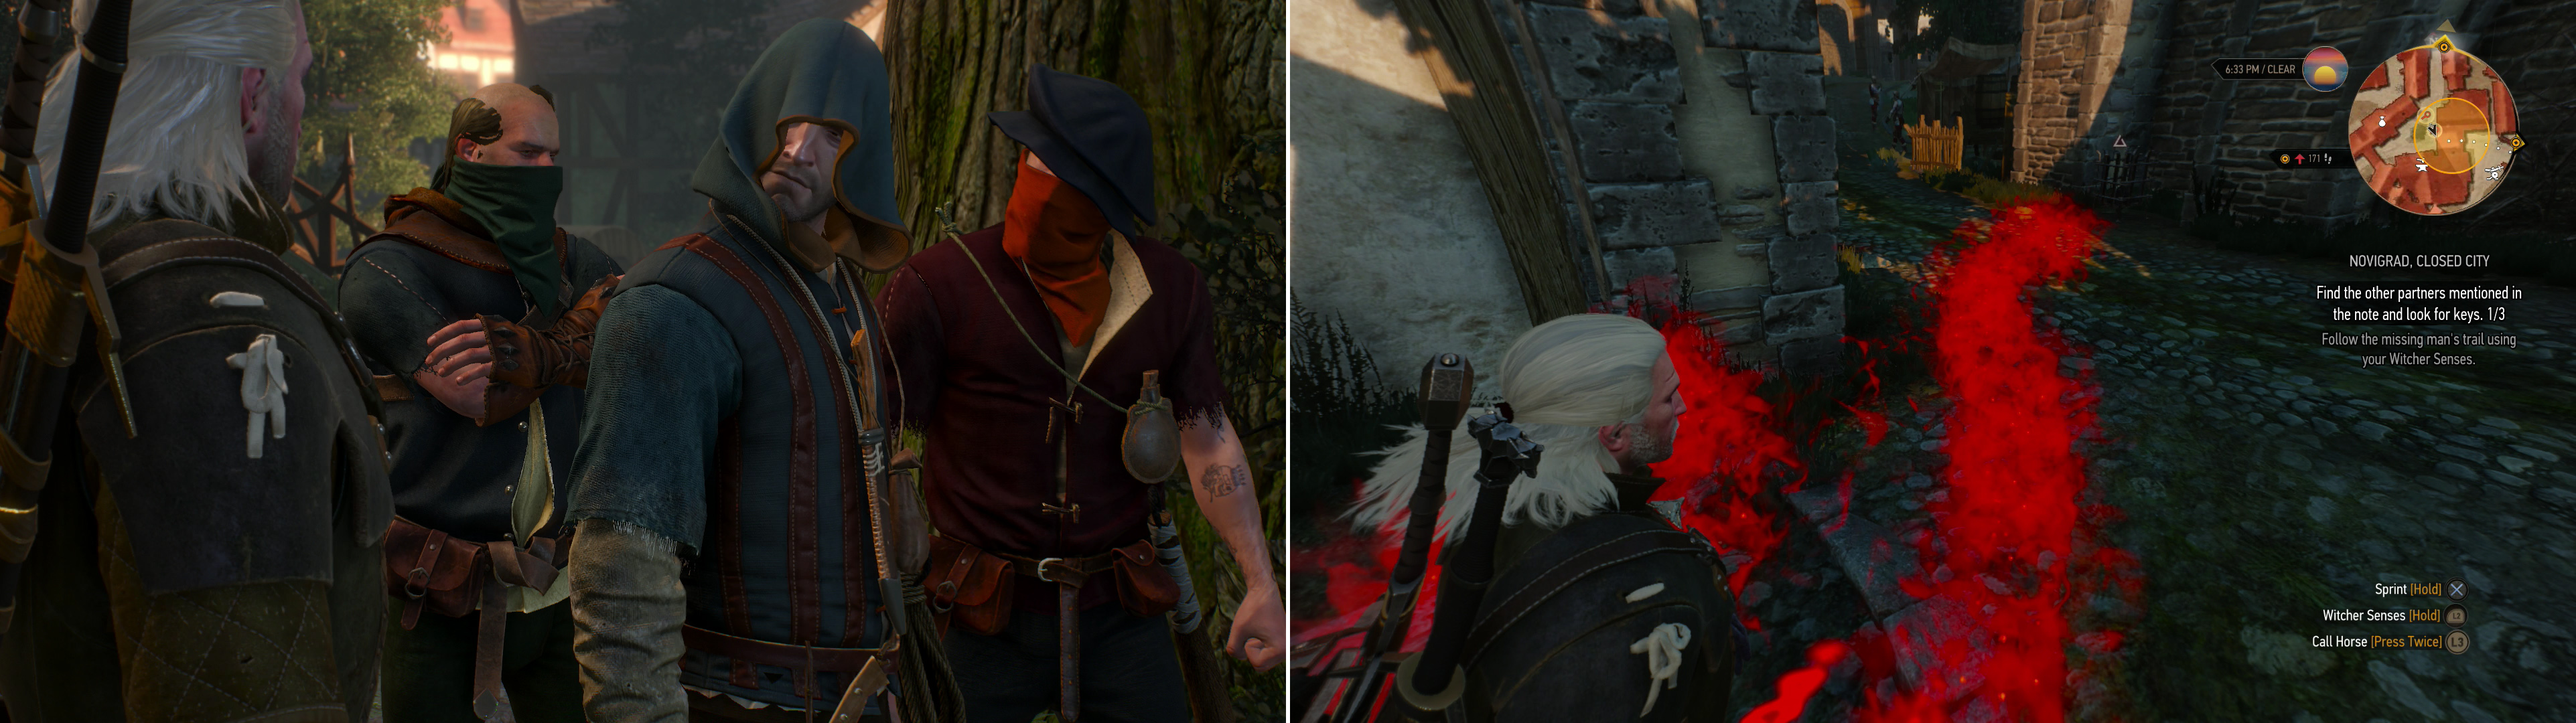 A group of Bandits asks you to help them find their “friend” (left). Follow the scent trial (right) and blood until you find who they seek (right).